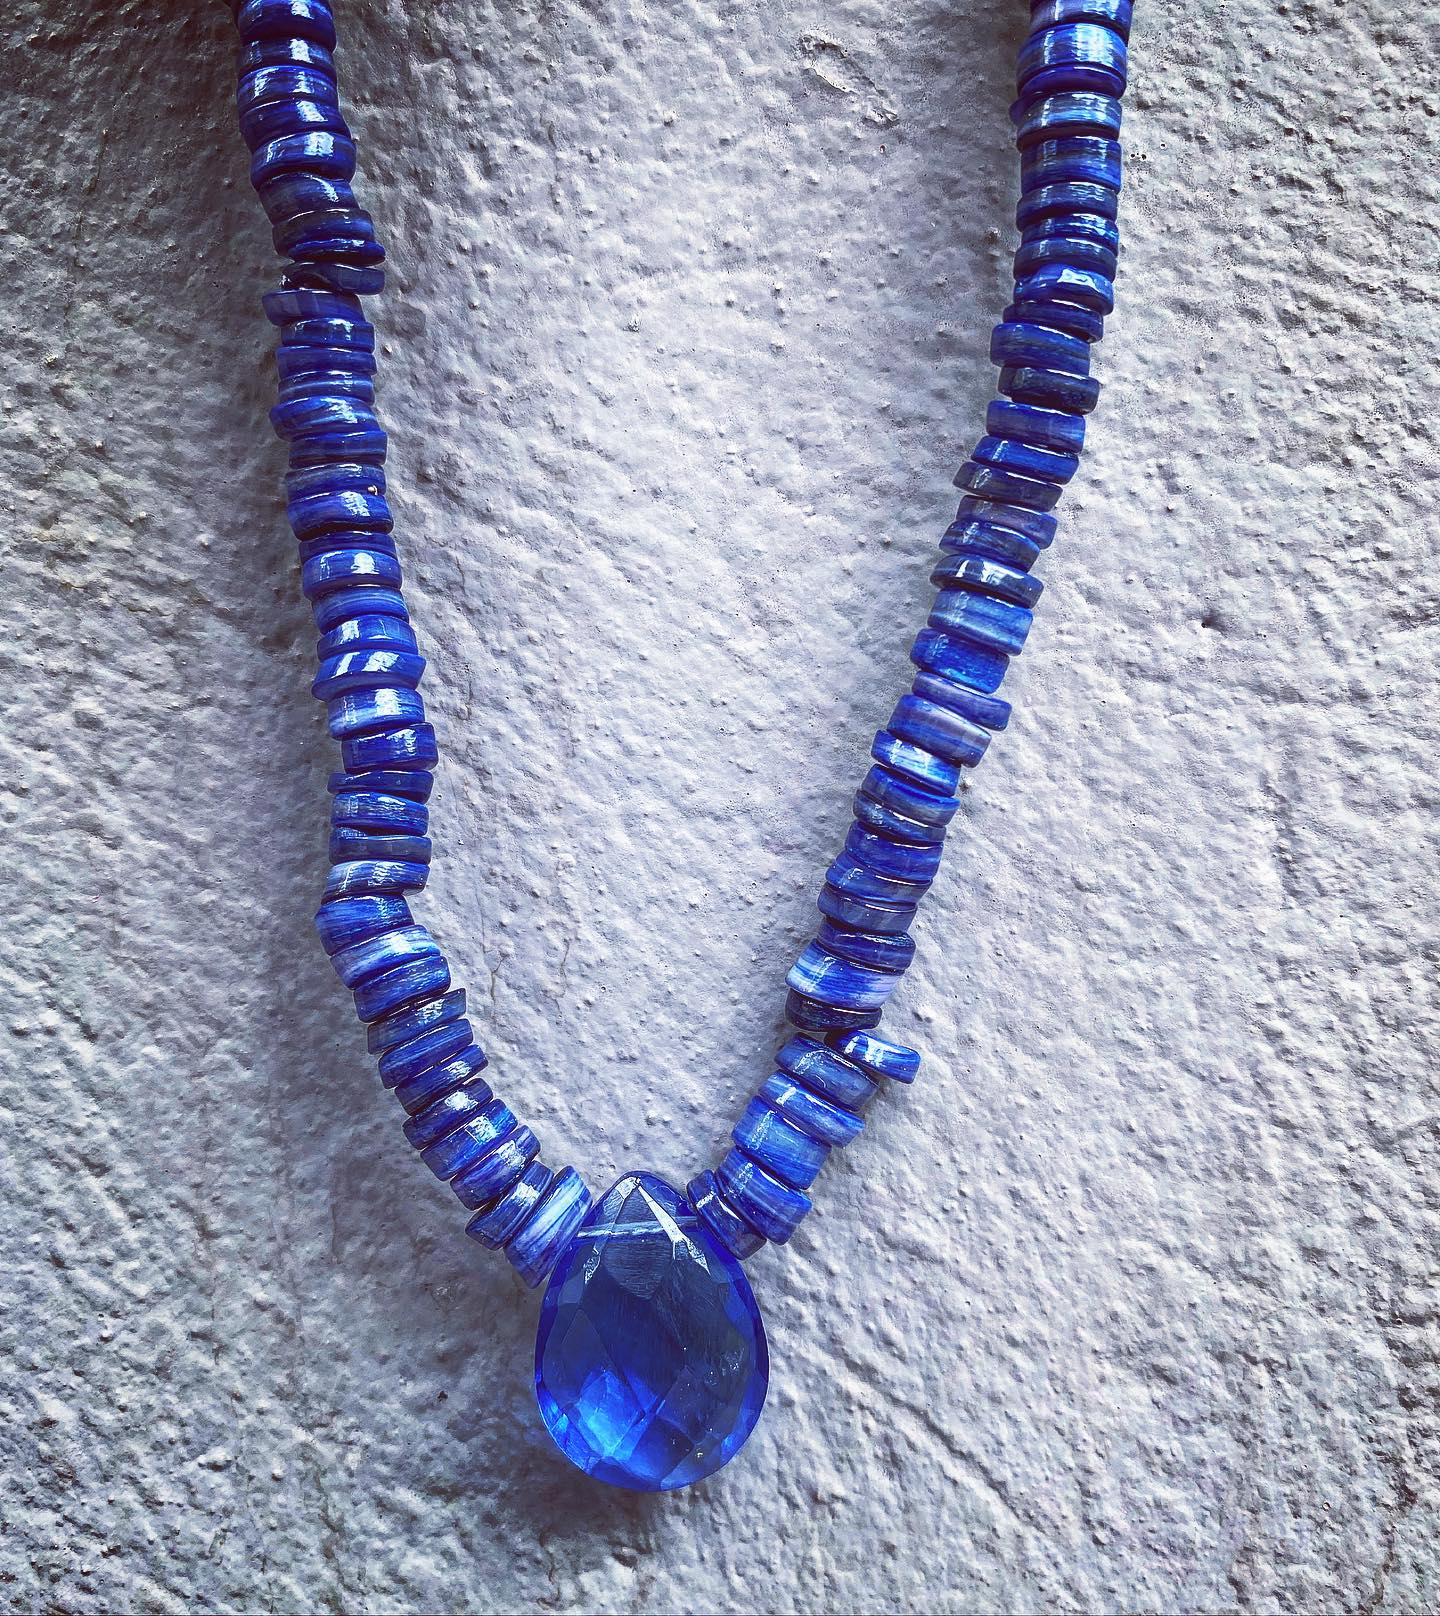 SScollection2022#mariatsaousi_com #mariatsaousi.com#collection#necklace by mariatsaousi.com#stayhome #staysafe #summervibes #summercollection #newcollection #necklaces #handmadejewelry #earrings#semiprecious stones#
mariatsaousi_com #mariatsaousi_com #noema_kythnos